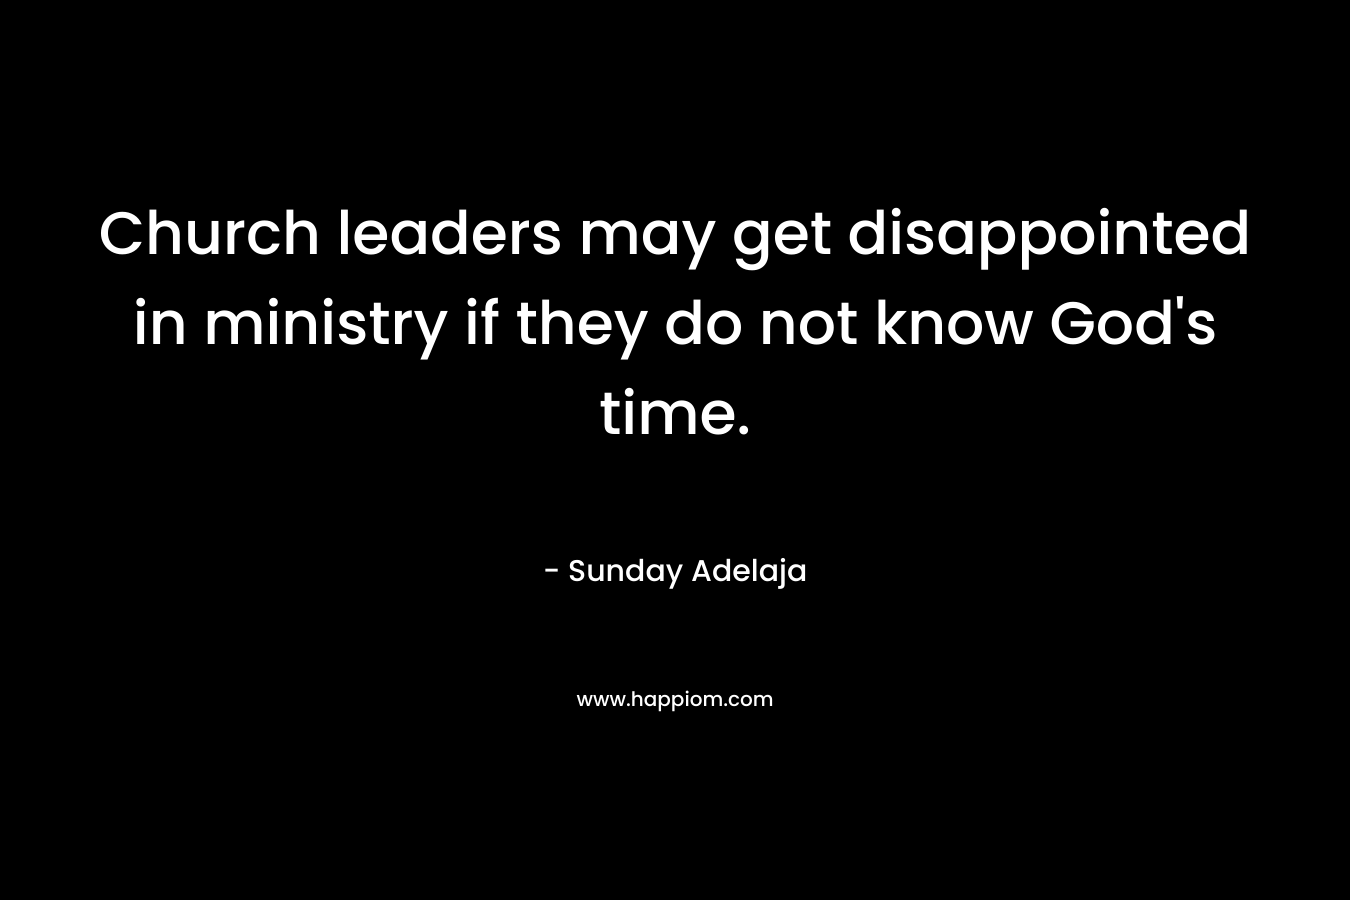 Church leaders may get disappointed in ministry if they do not know God’s time. – Sunday Adelaja